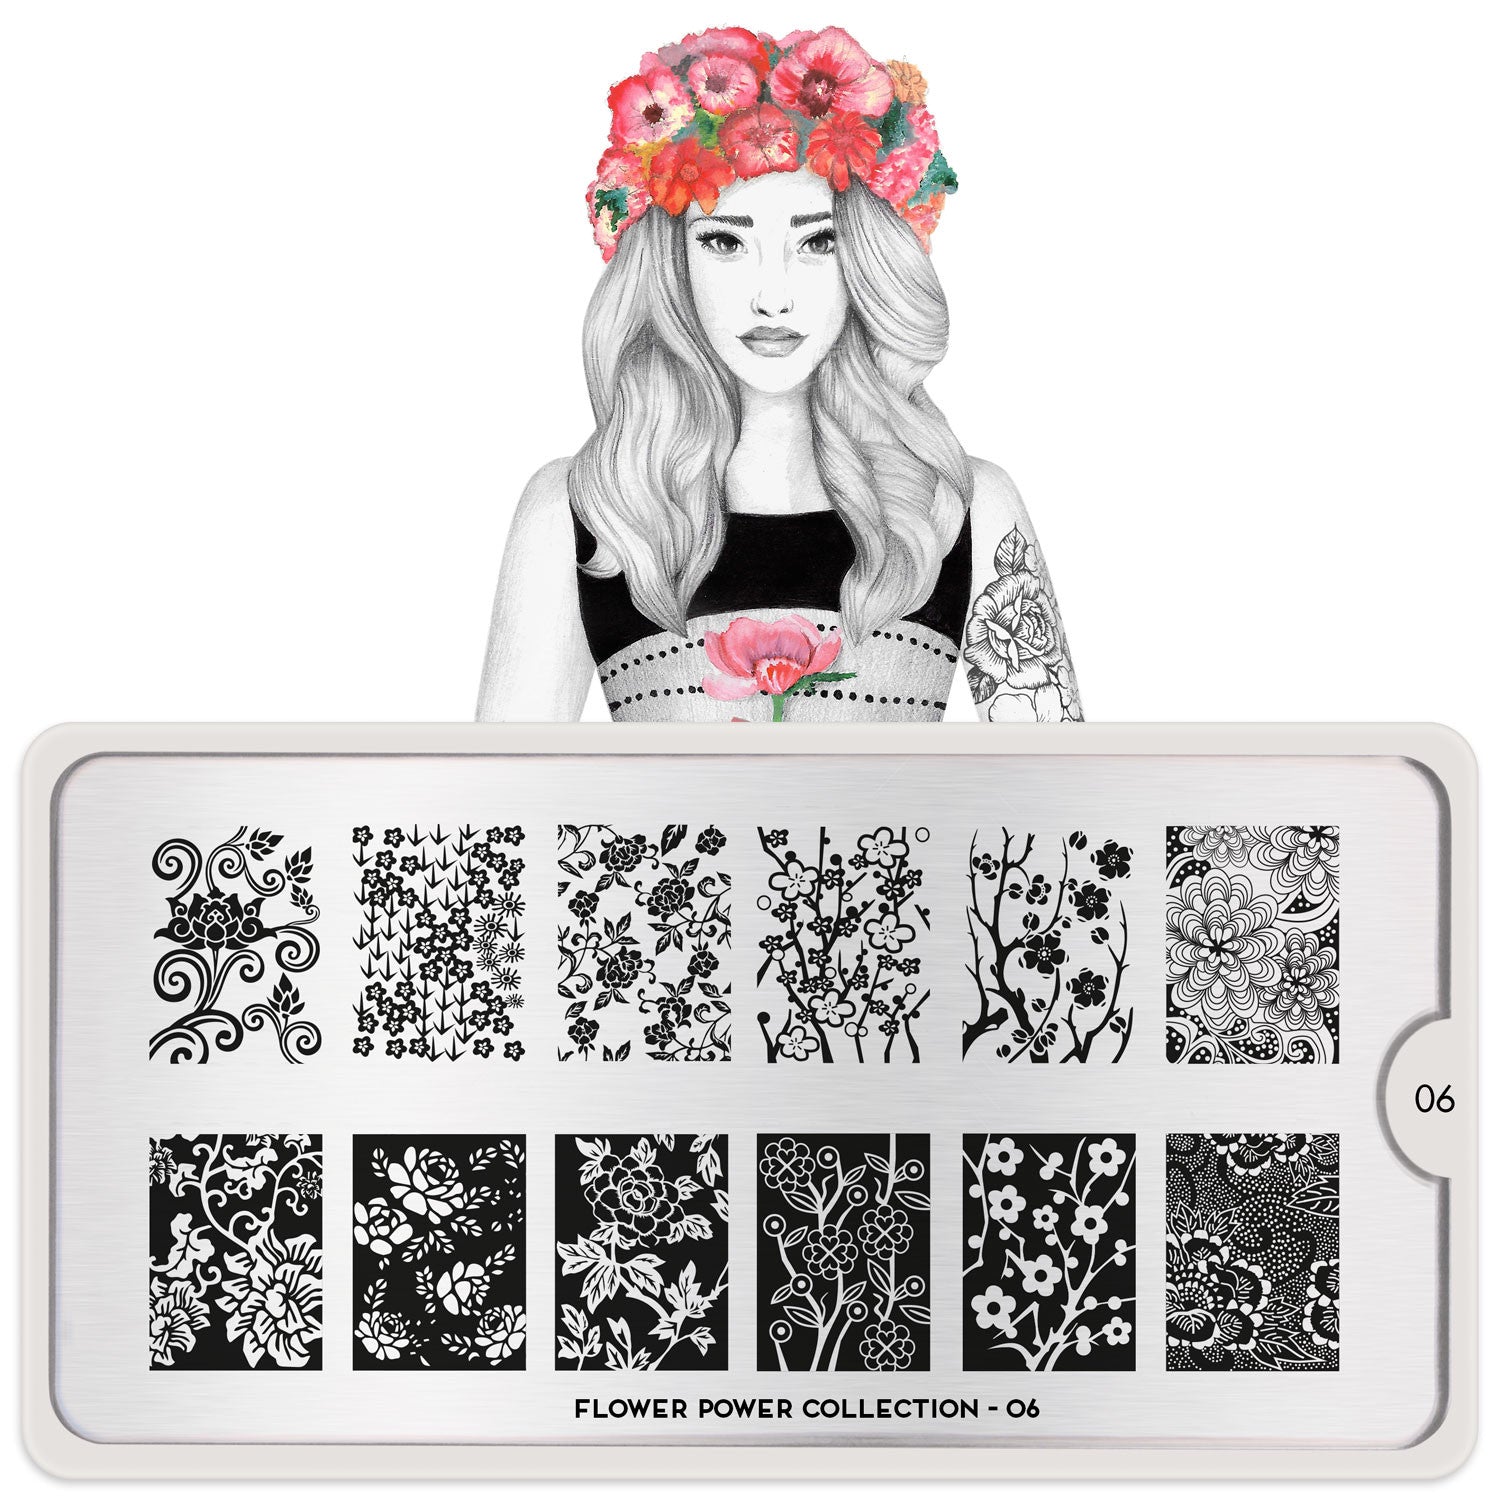 Flower Power 06 - Oriental Floral Prints Palettes Large Moyou London Nail Stamping Plate